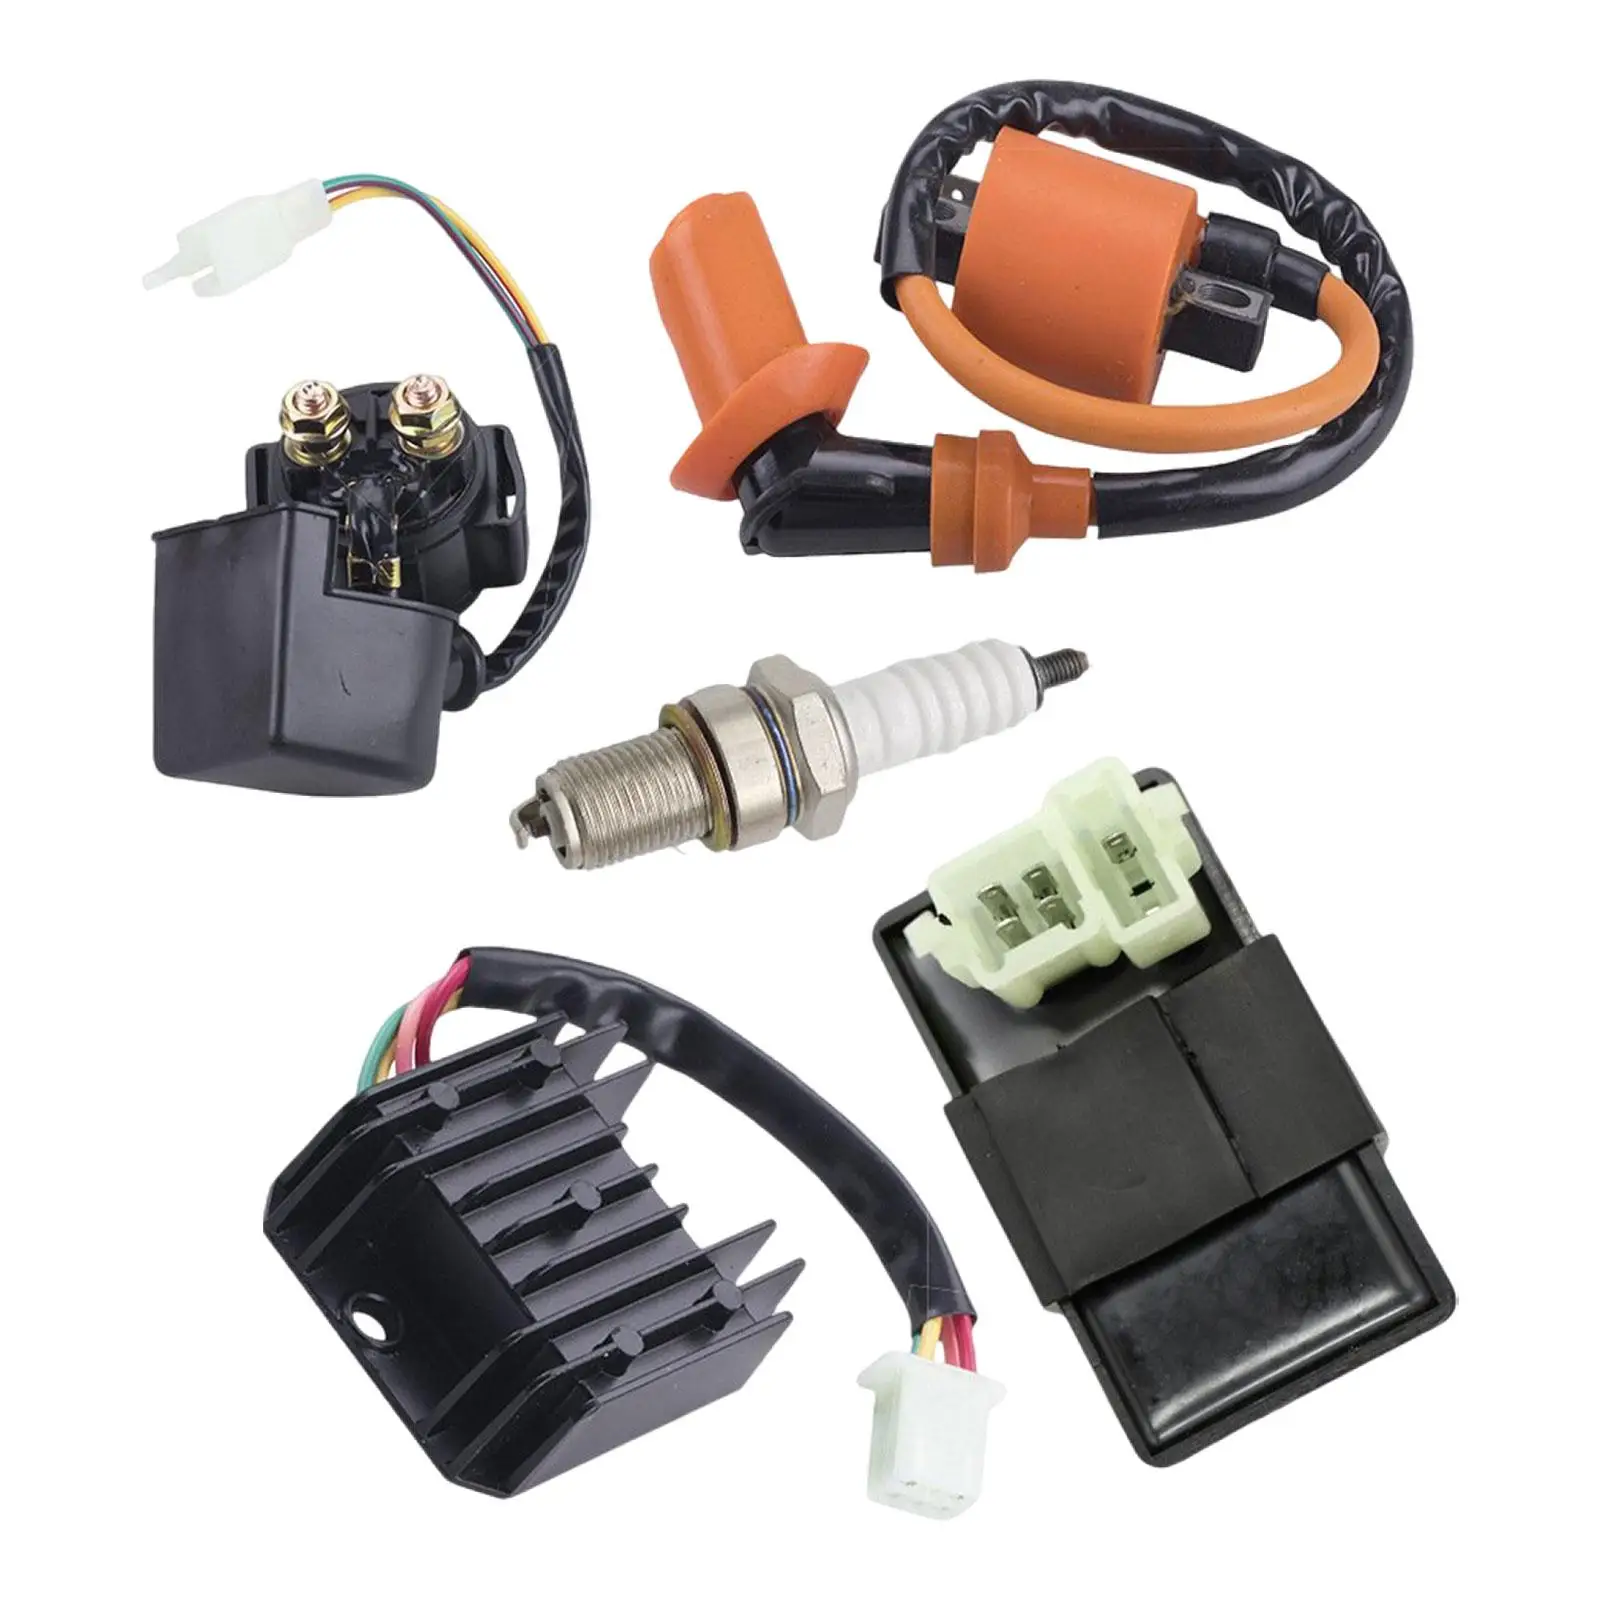 Ignition Coil Solenoid Relay Rectifier Cdi Box for 125cc 150cc 200cc ATV Dirt Bikes Mopeds Quad Pit Bikes Replacement Parts